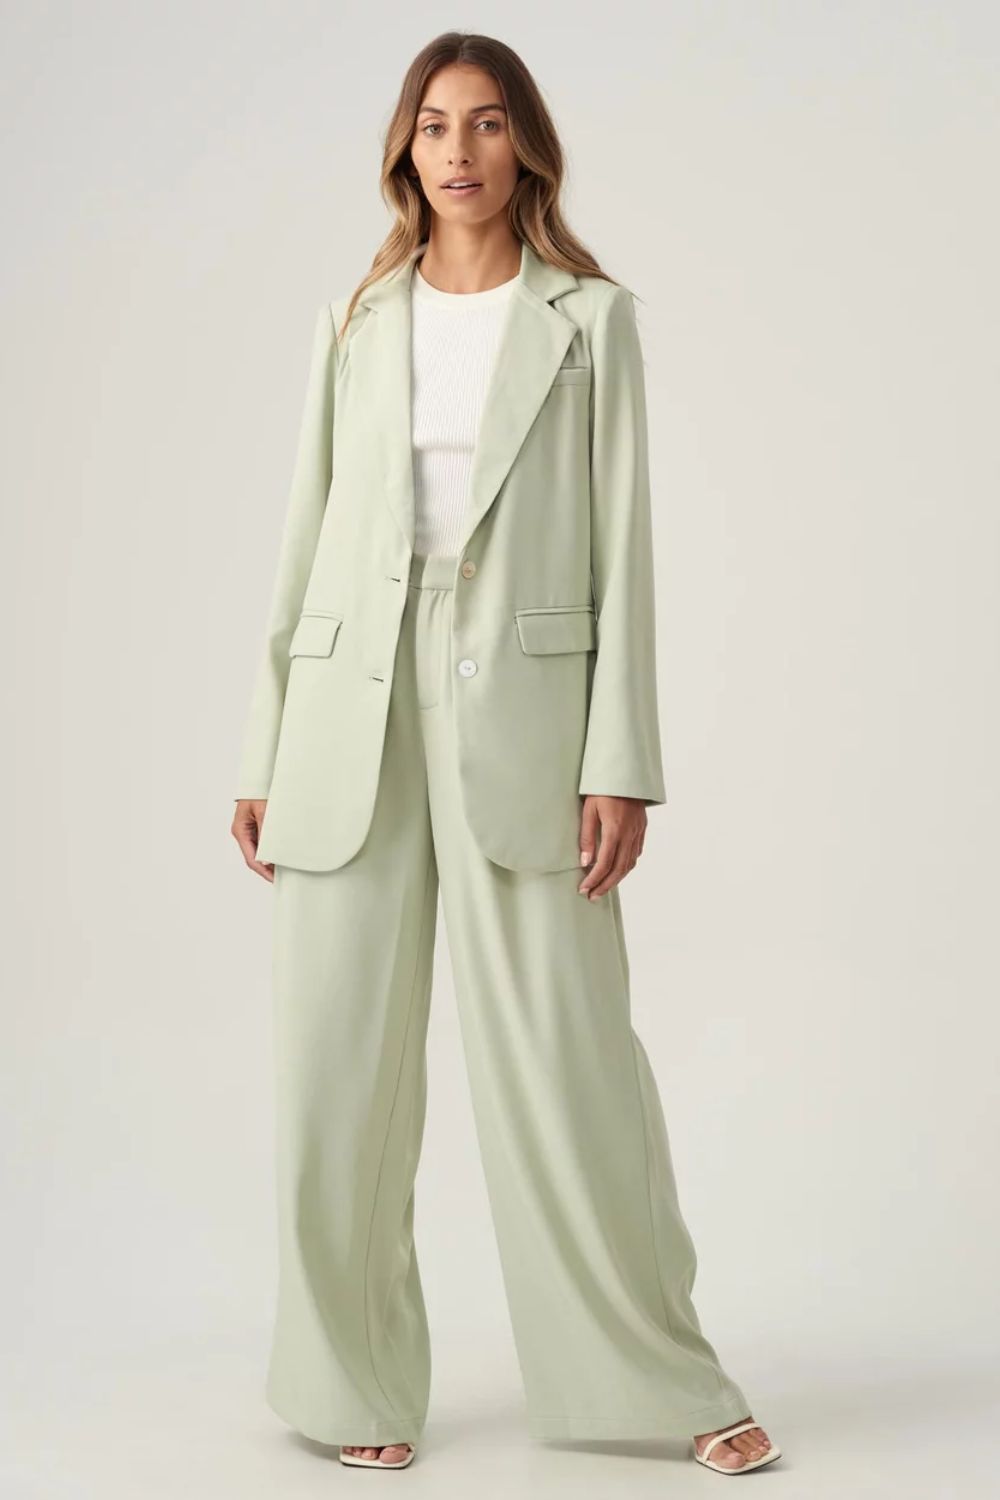 the-iconic-green-suit-miranda-dupe